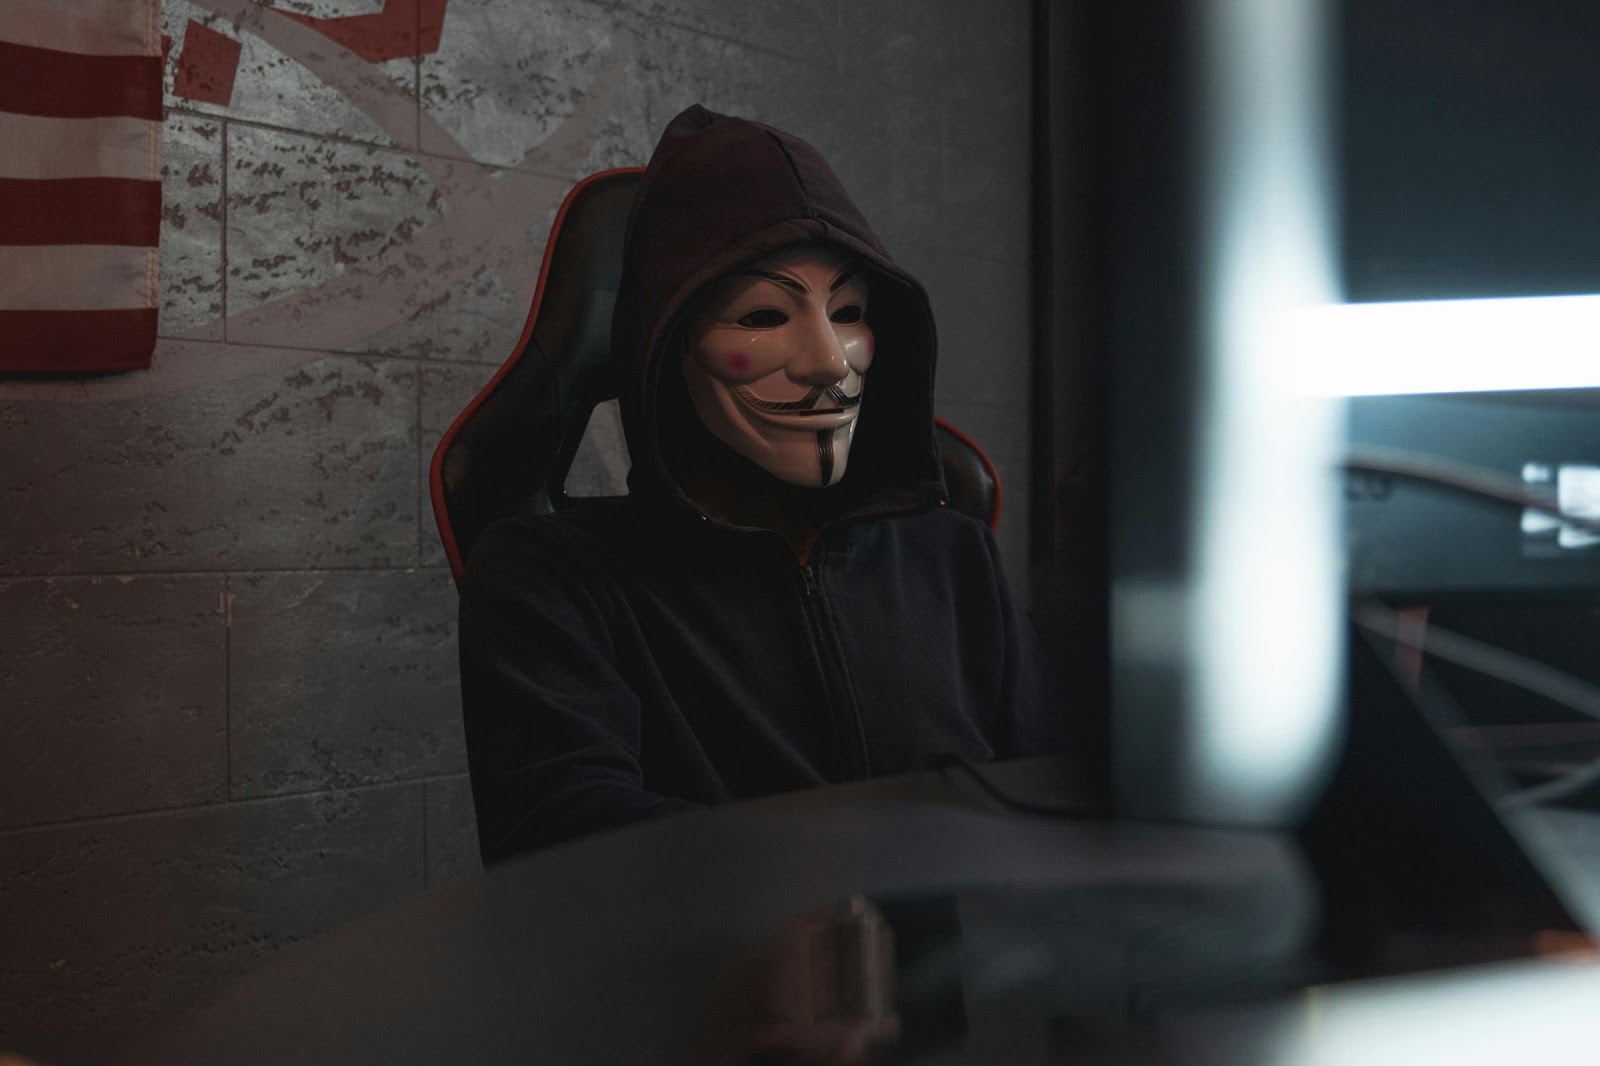 A man dressed in black with a hood and mask, sitting in front in a gaming chair